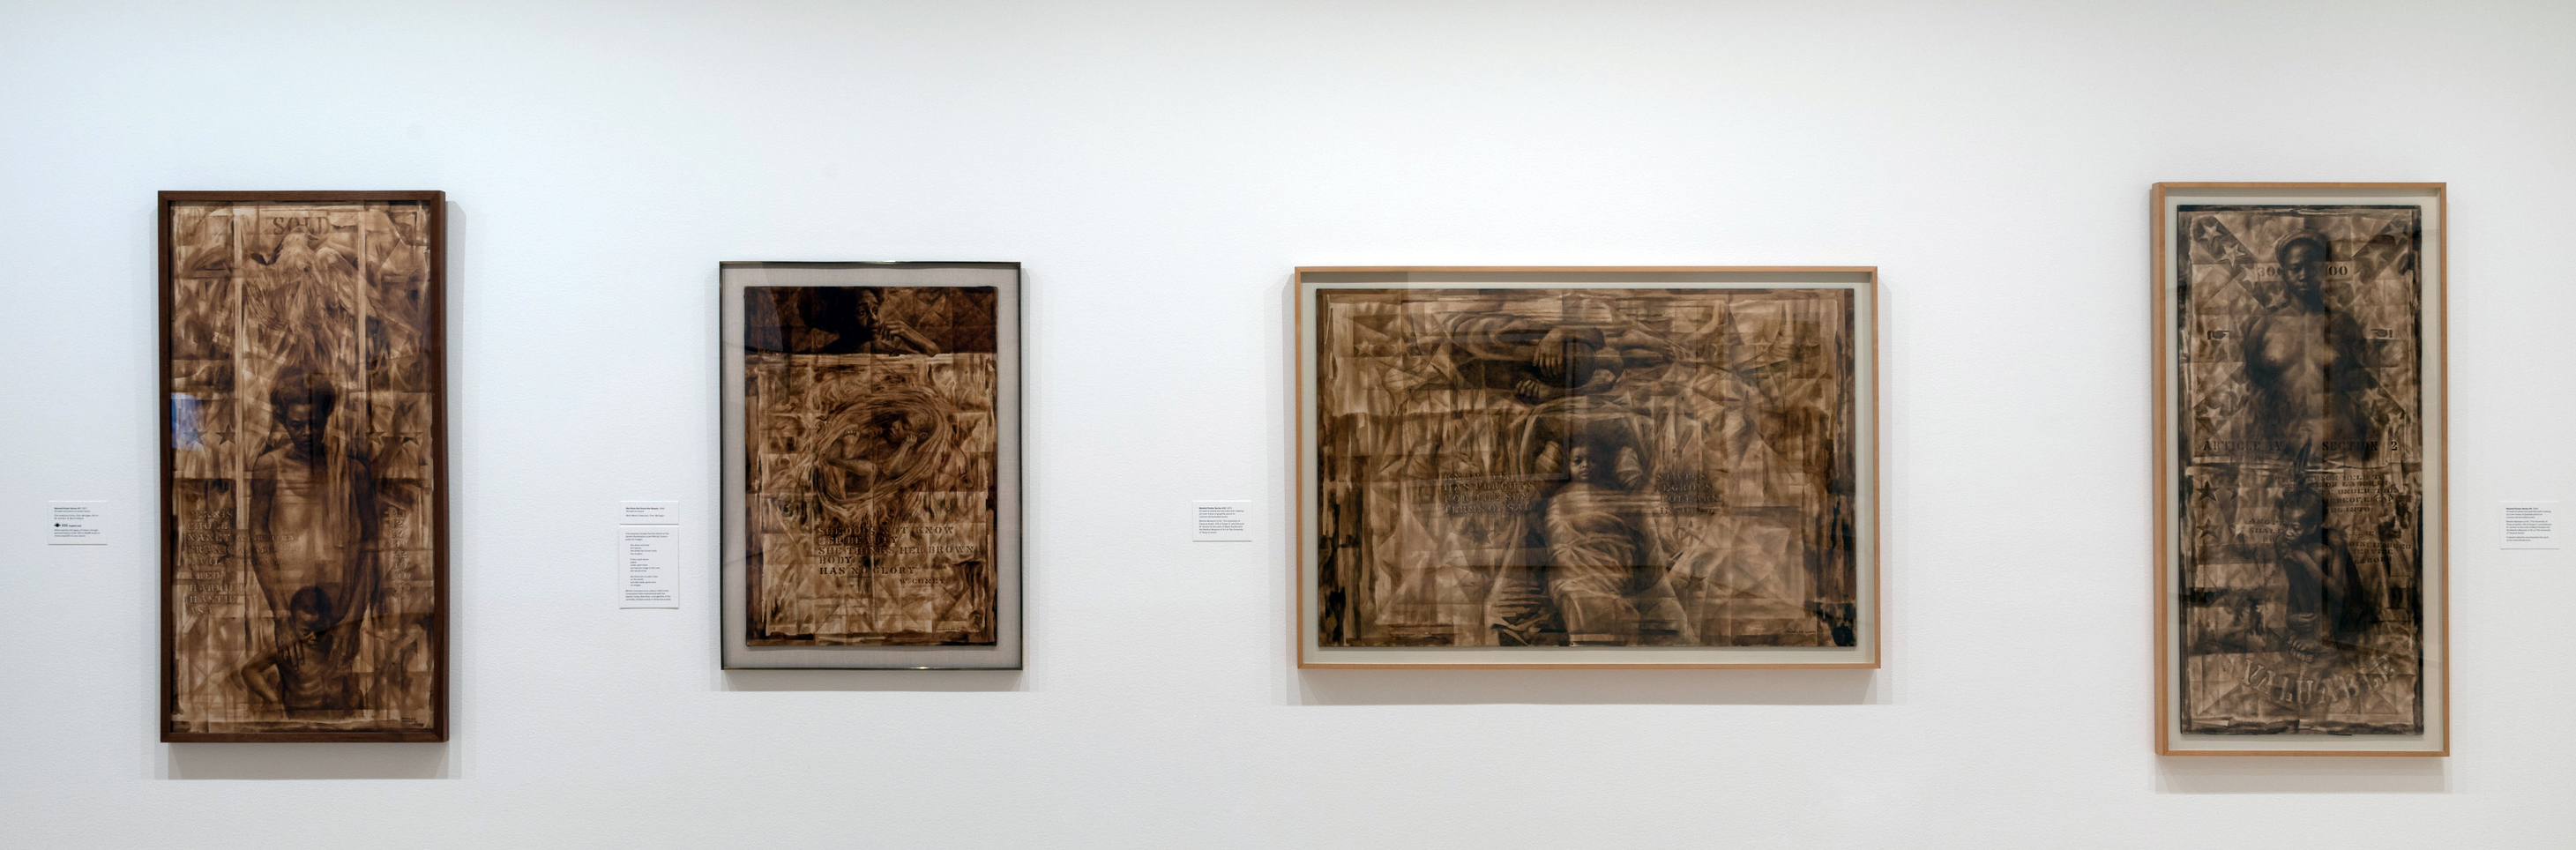 Charles White MoMA, NYC – Detroit Art Review